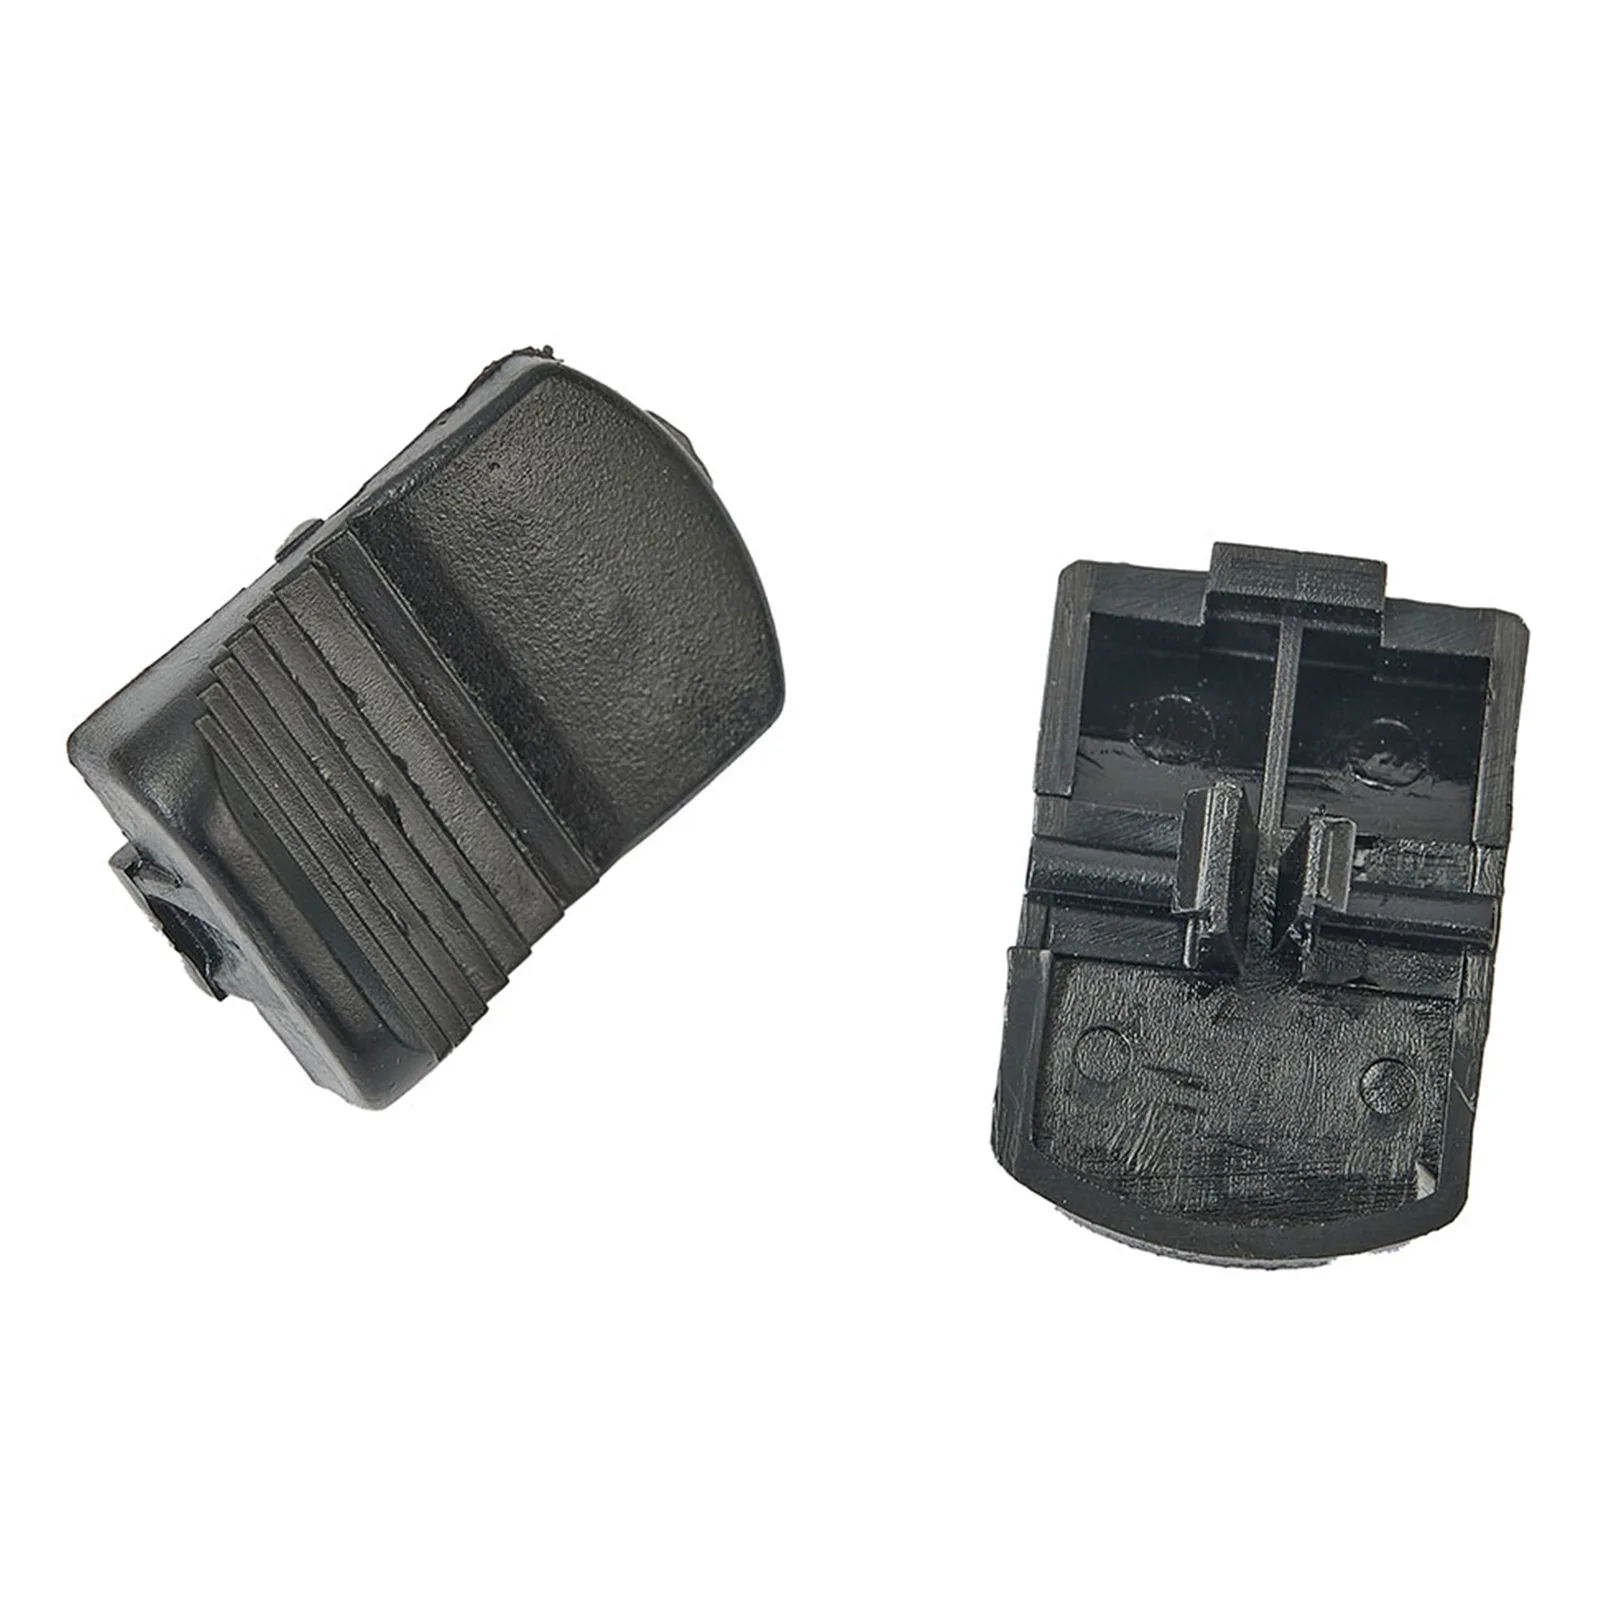 

2PCS Angle Grinder Switch Button Repair Parts For Bosch GWS6/8-100/125 FF03-100A Hom Power Tool Replacement Accessories